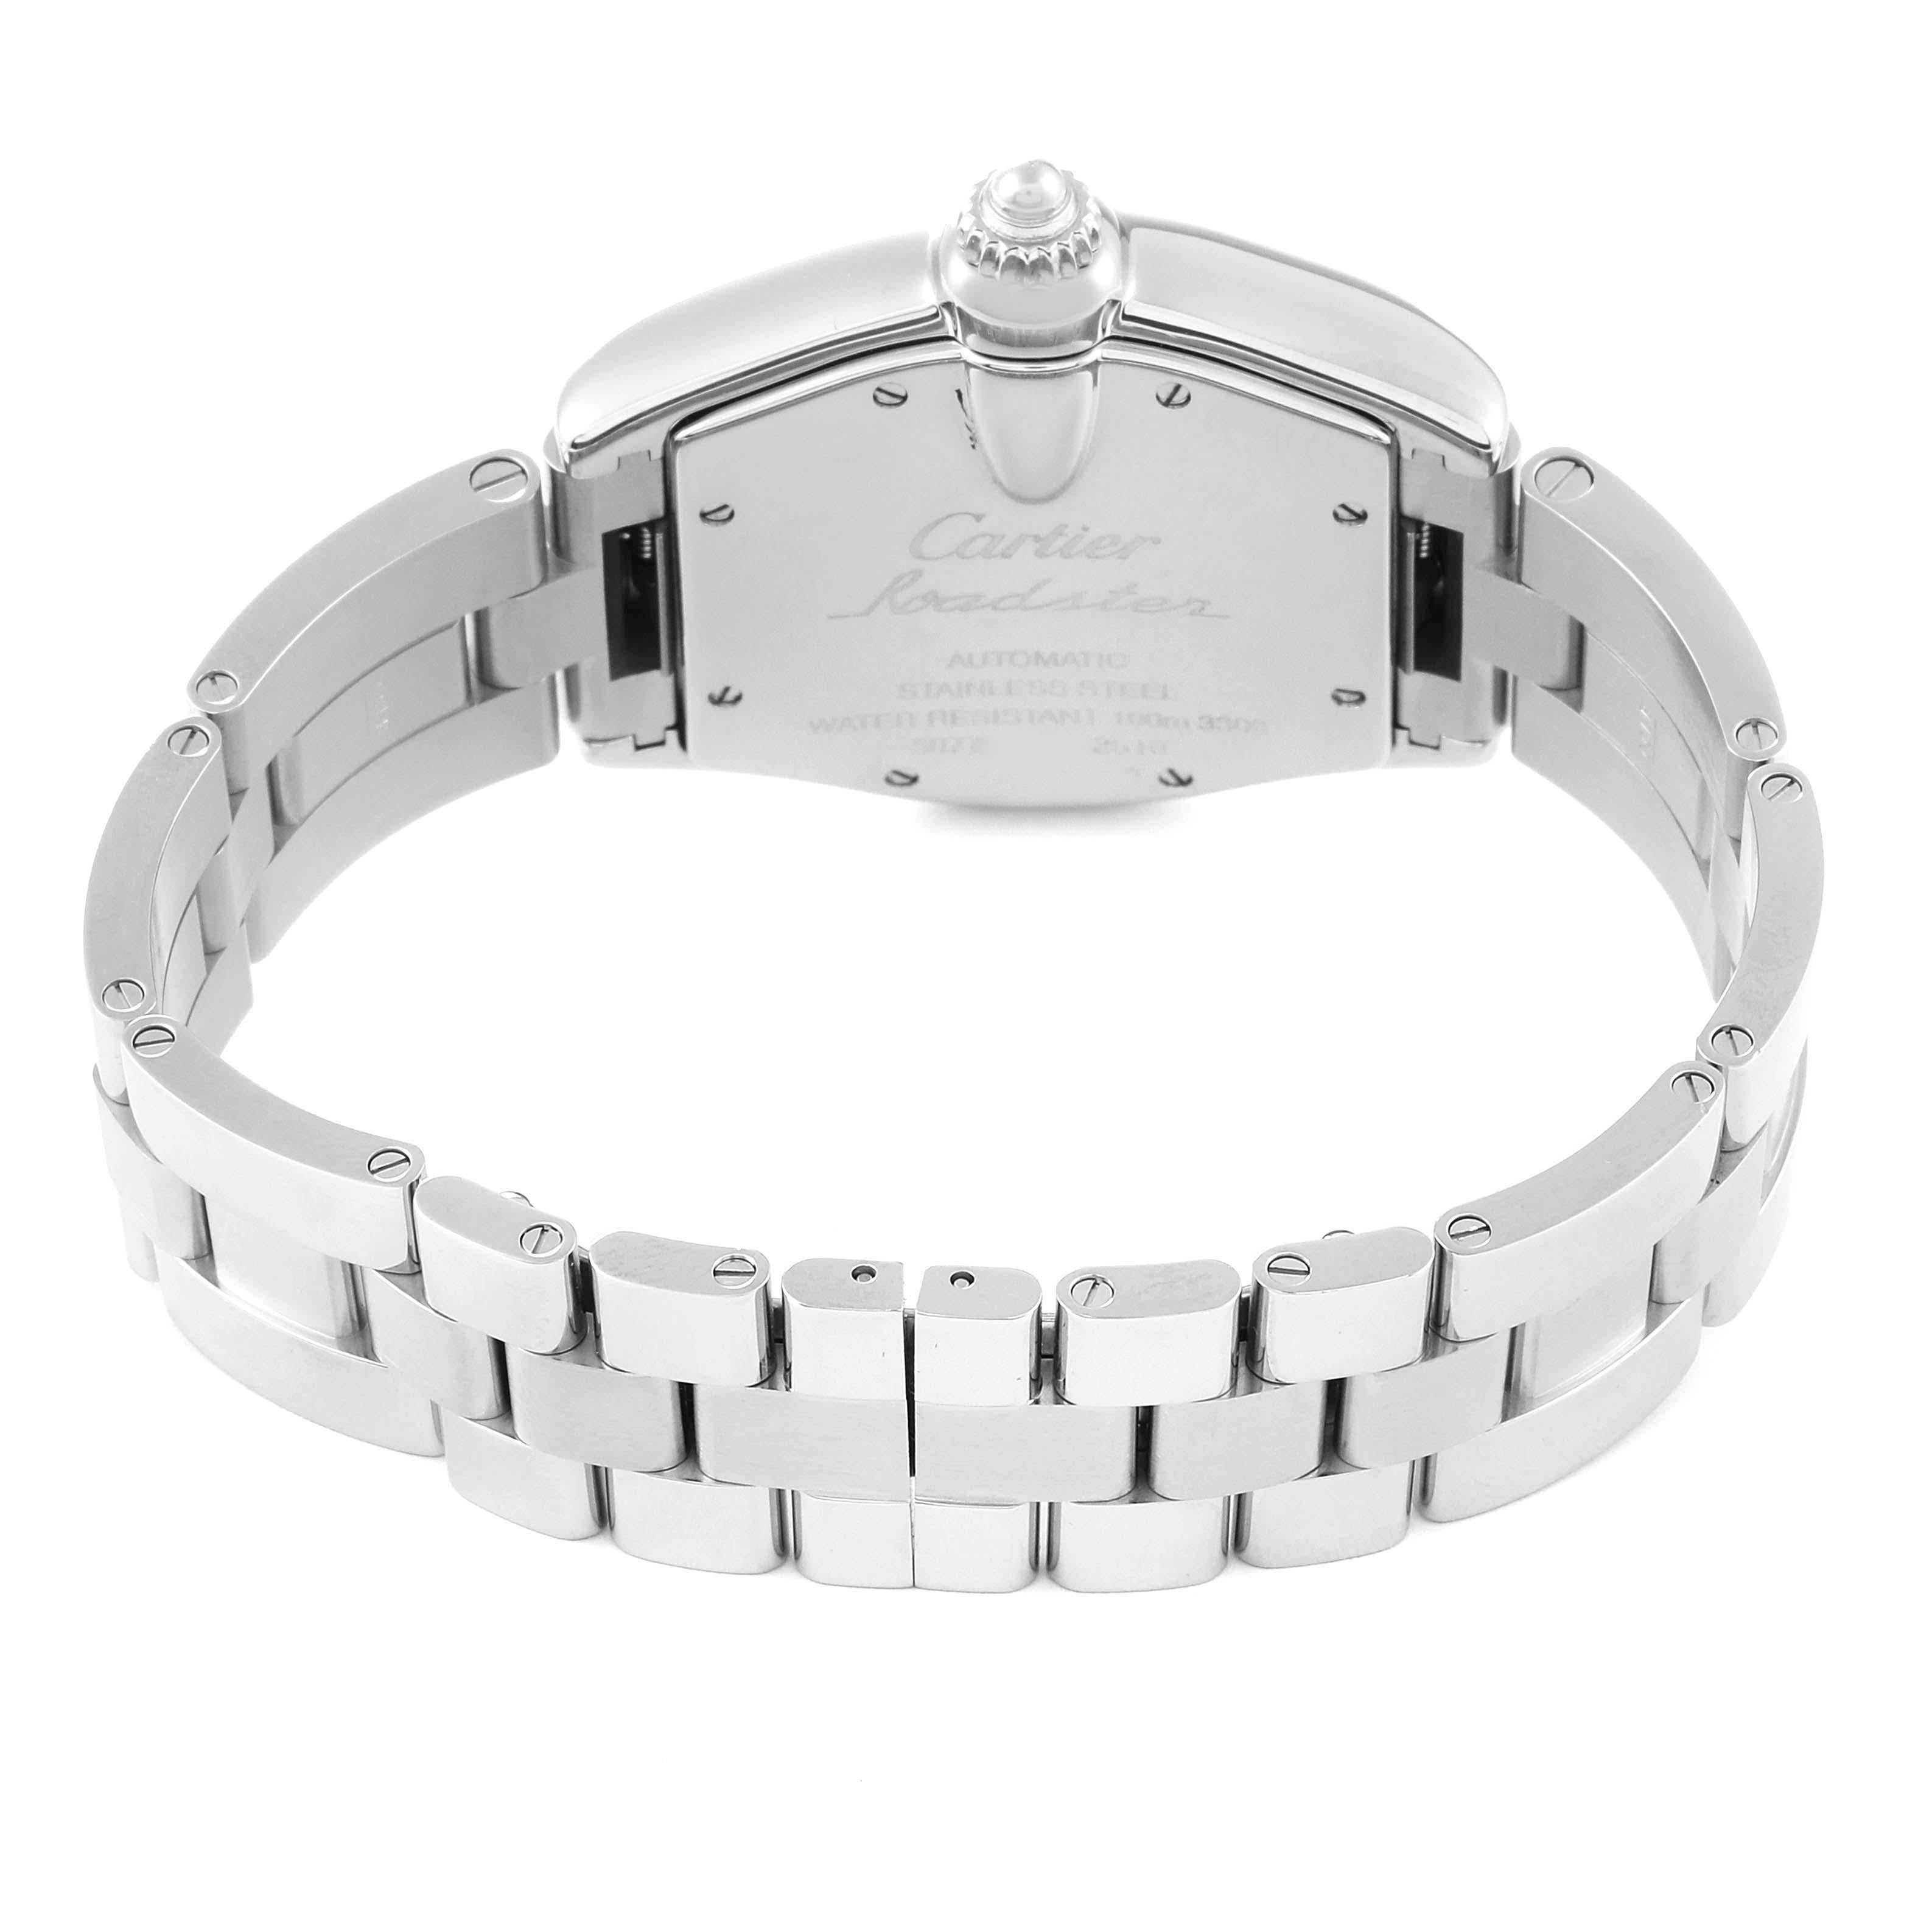 Cartier Roadster Large Silver Dial Steel Mens Watch W62025V3 For Sale 1